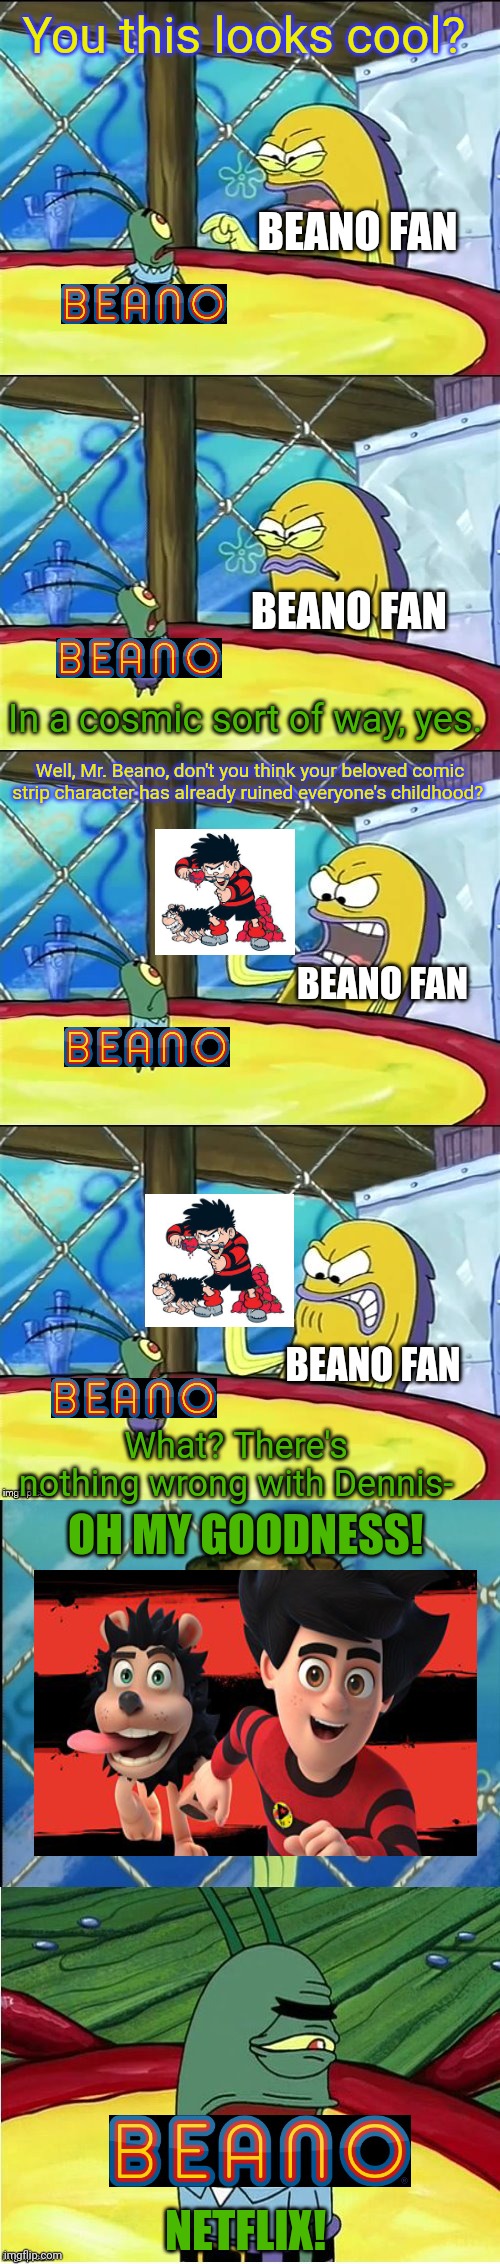 Oh my goodness! | You this looks cool? BEANO FAN; BEANO FAN; In a cosmic sort of way, yes. Well, Mr. Beano, don't you think your beloved comic strip character has already ruined everyone's childhood? BEANO FAN; BEANO FAN; What? There's nothing wrong with Dennis-; OH MY GOODNESS! NETFLIX! | image tagged in oh my goodness | made w/ Imgflip meme maker